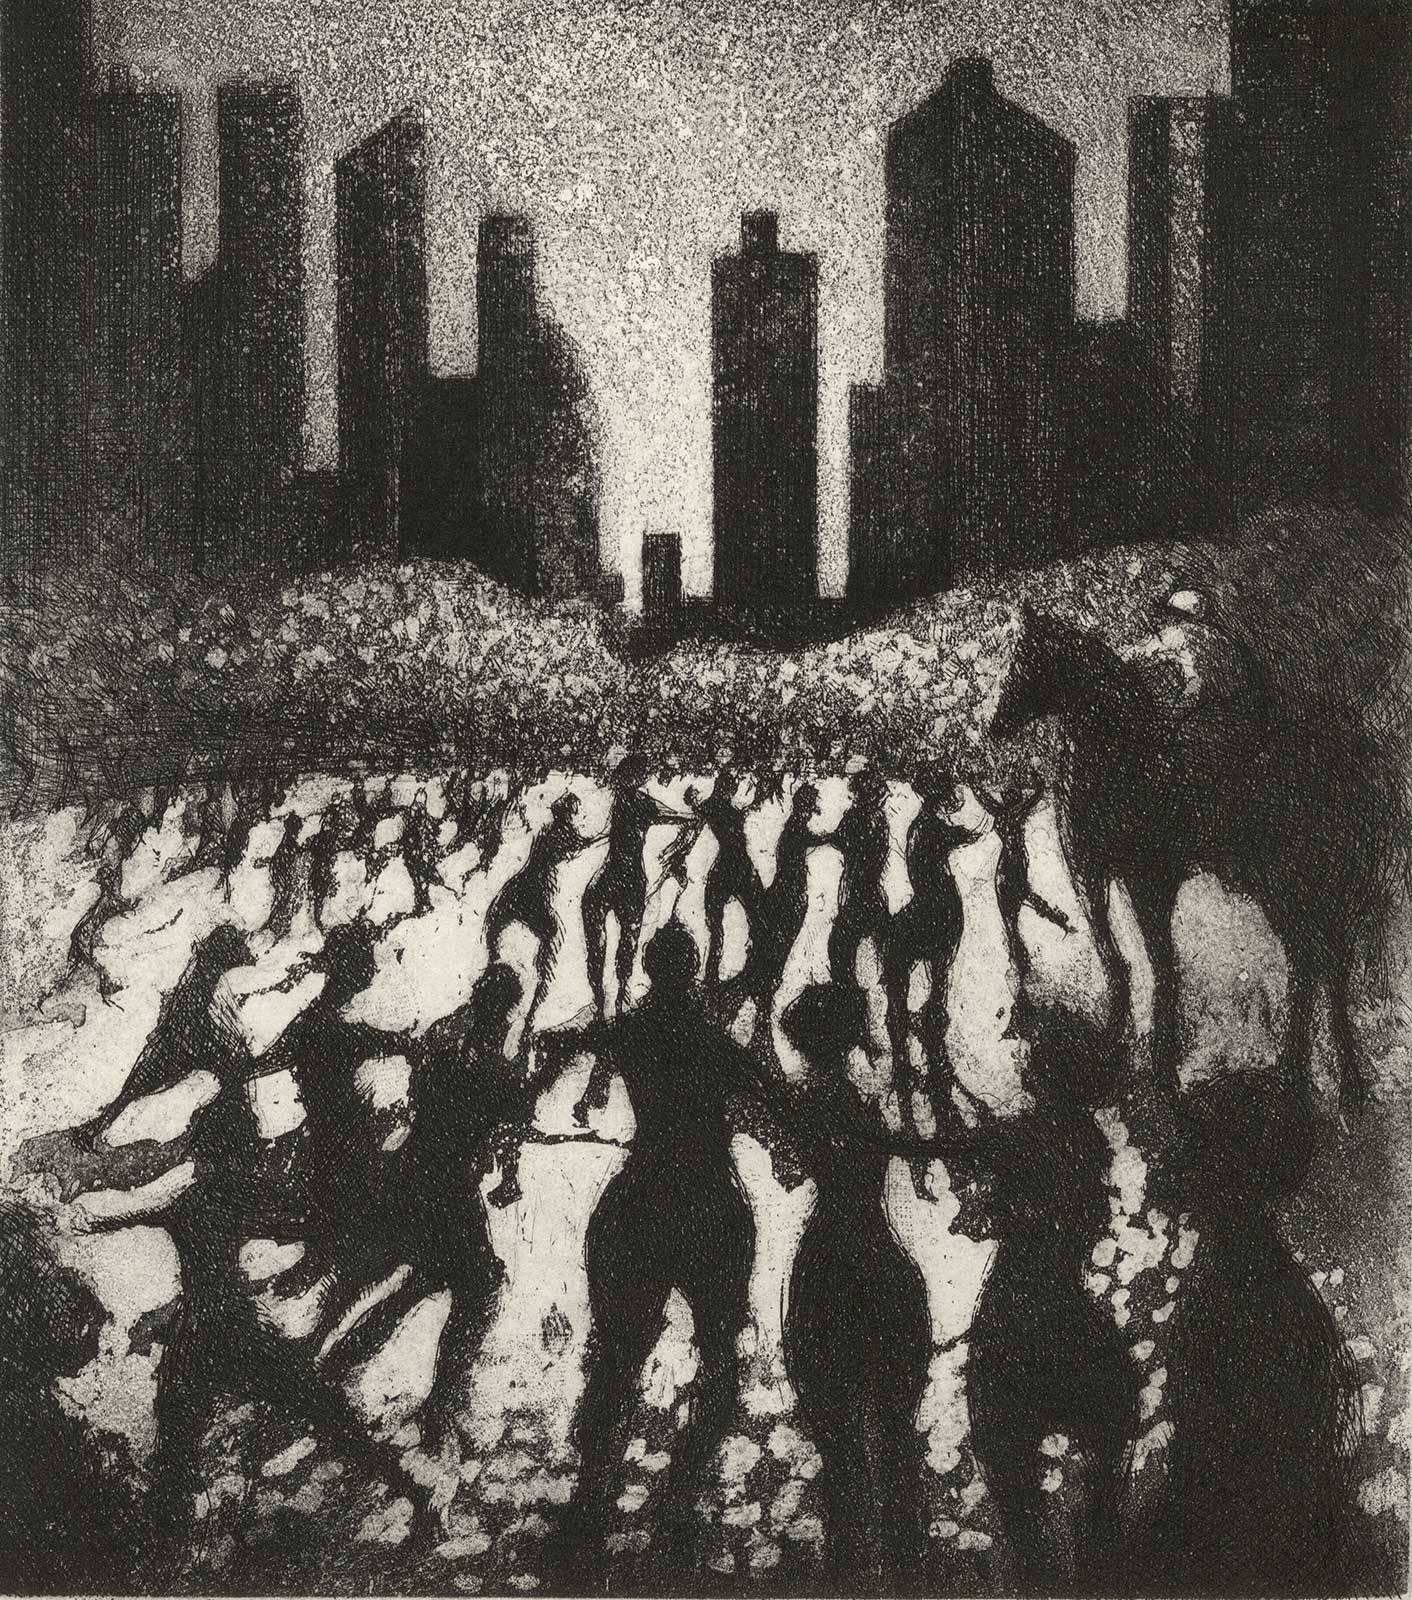 Bill Jacklin Figurative Print - After the Event I (the energy of  crowd after event in Manhattan's Central Park)